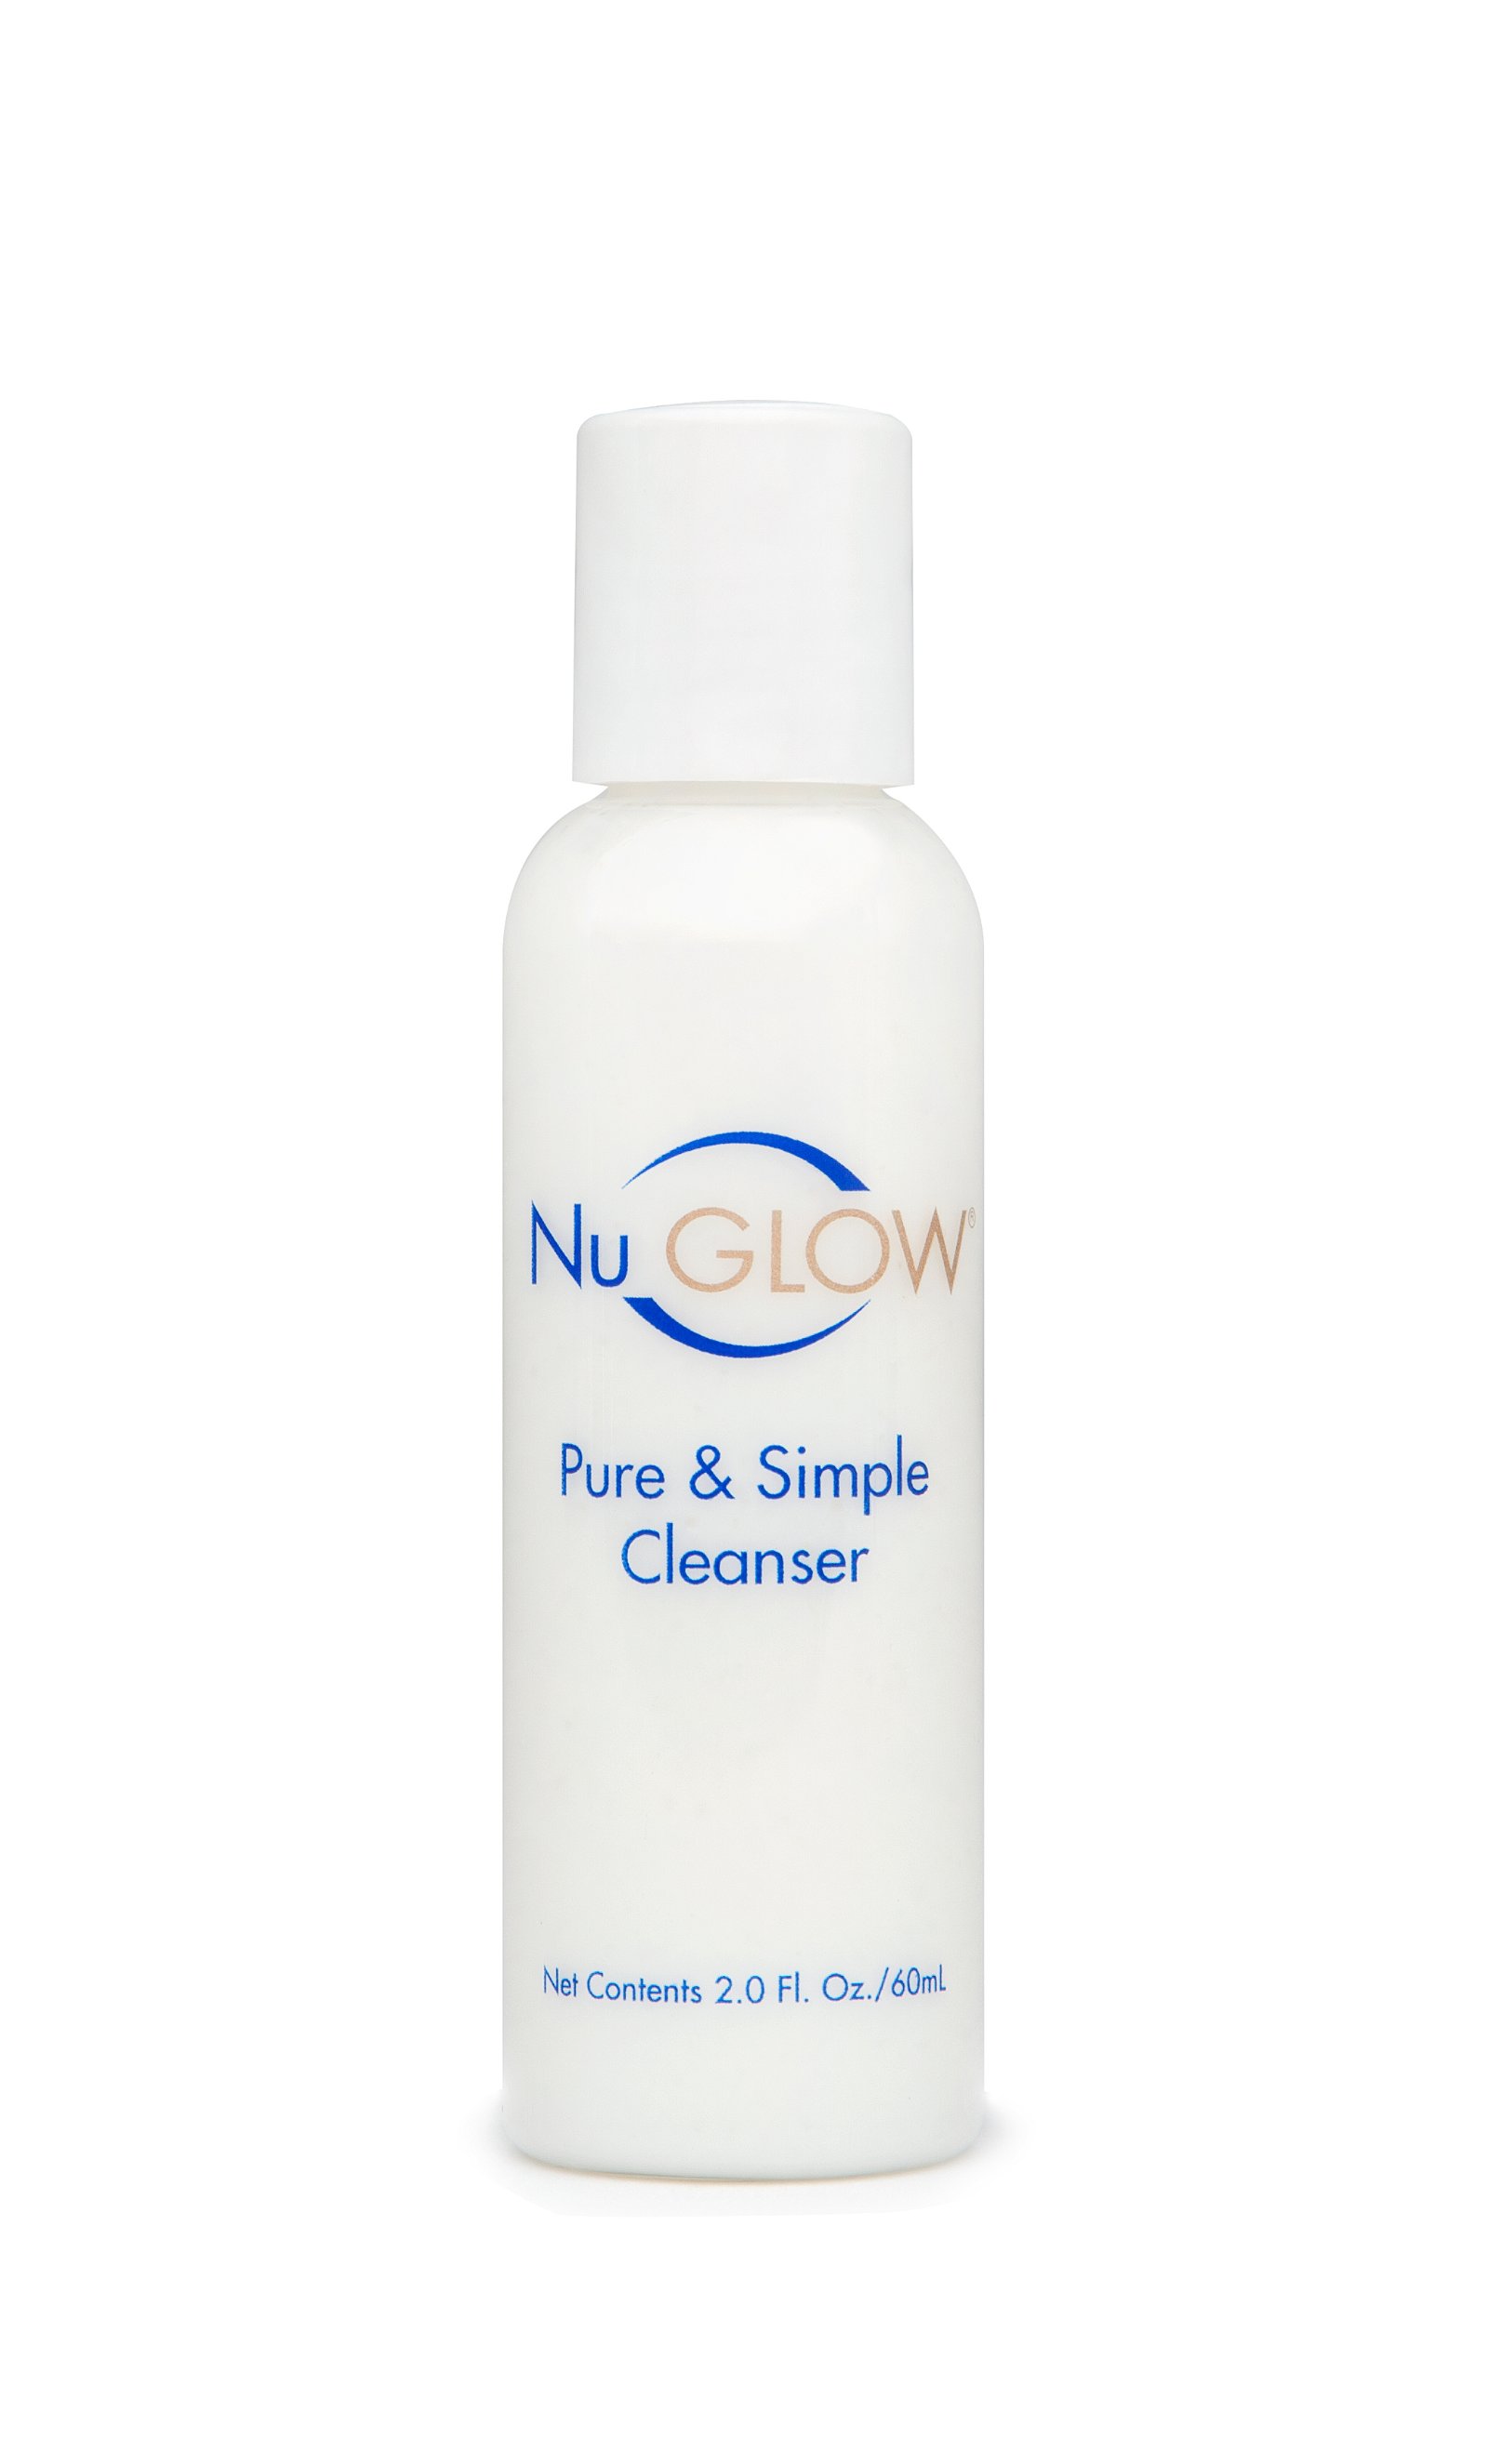 Pure & Simple Cleanser